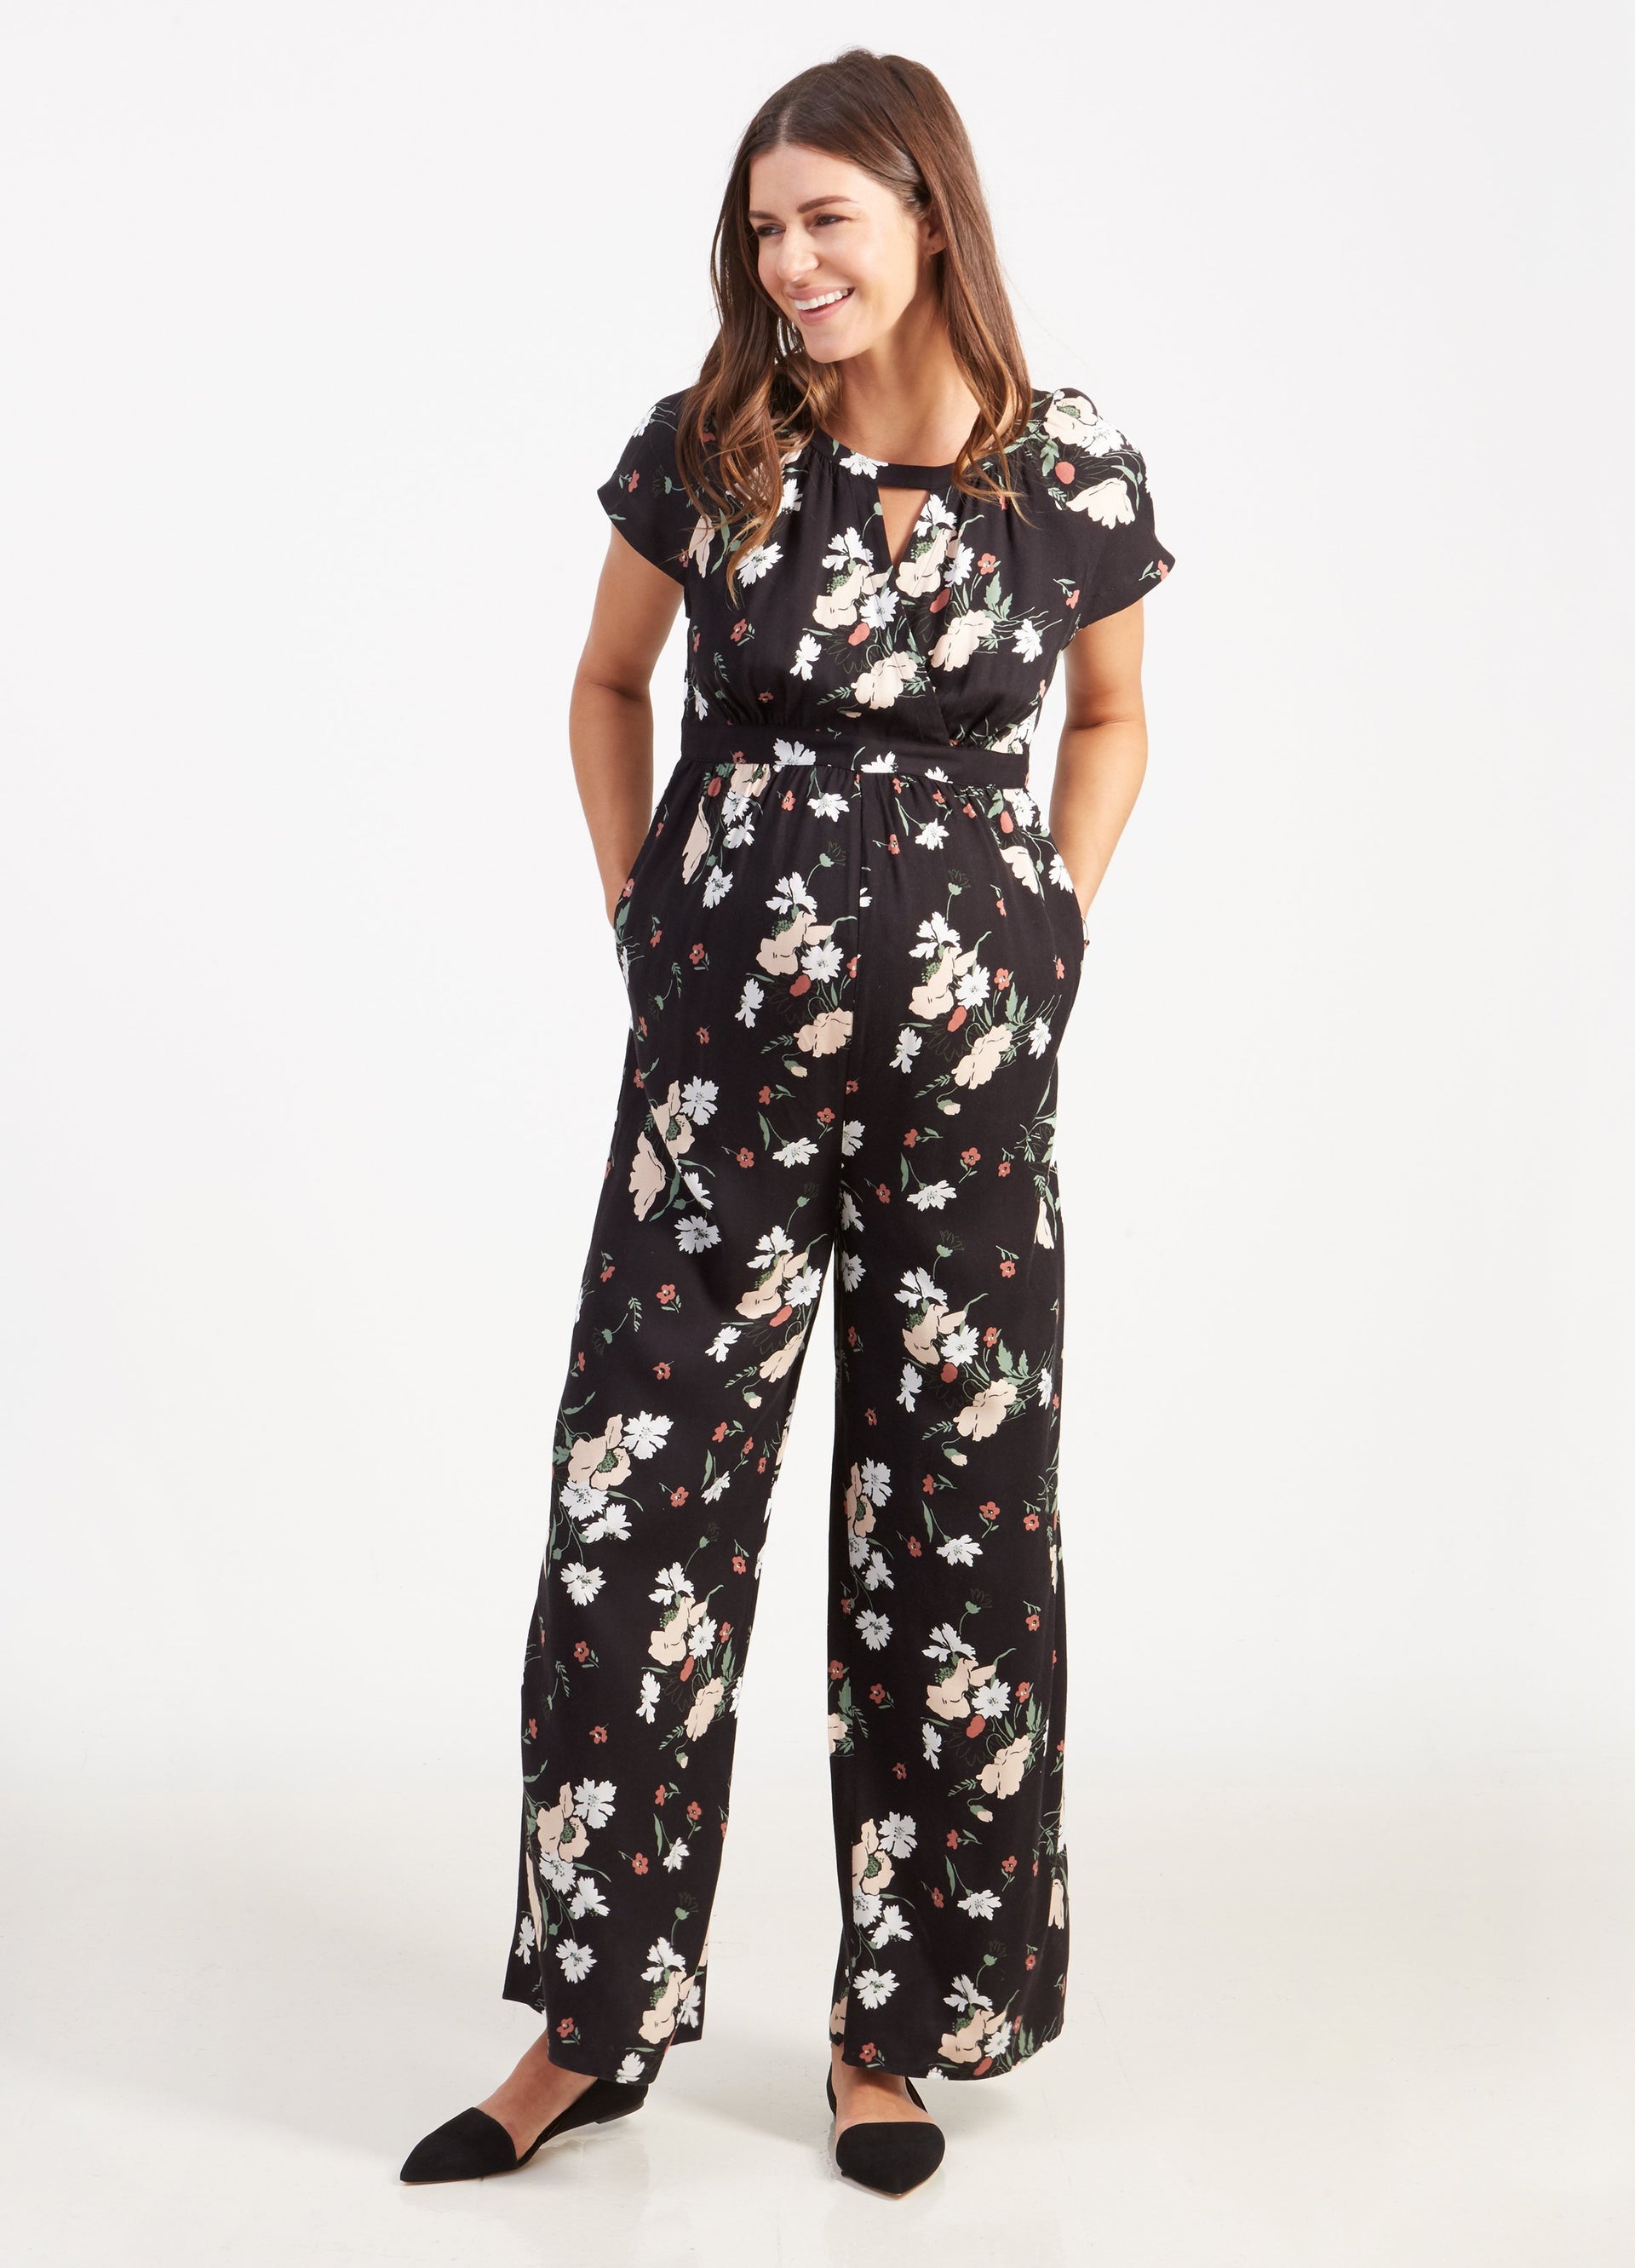 fitted maternity jumpsuit